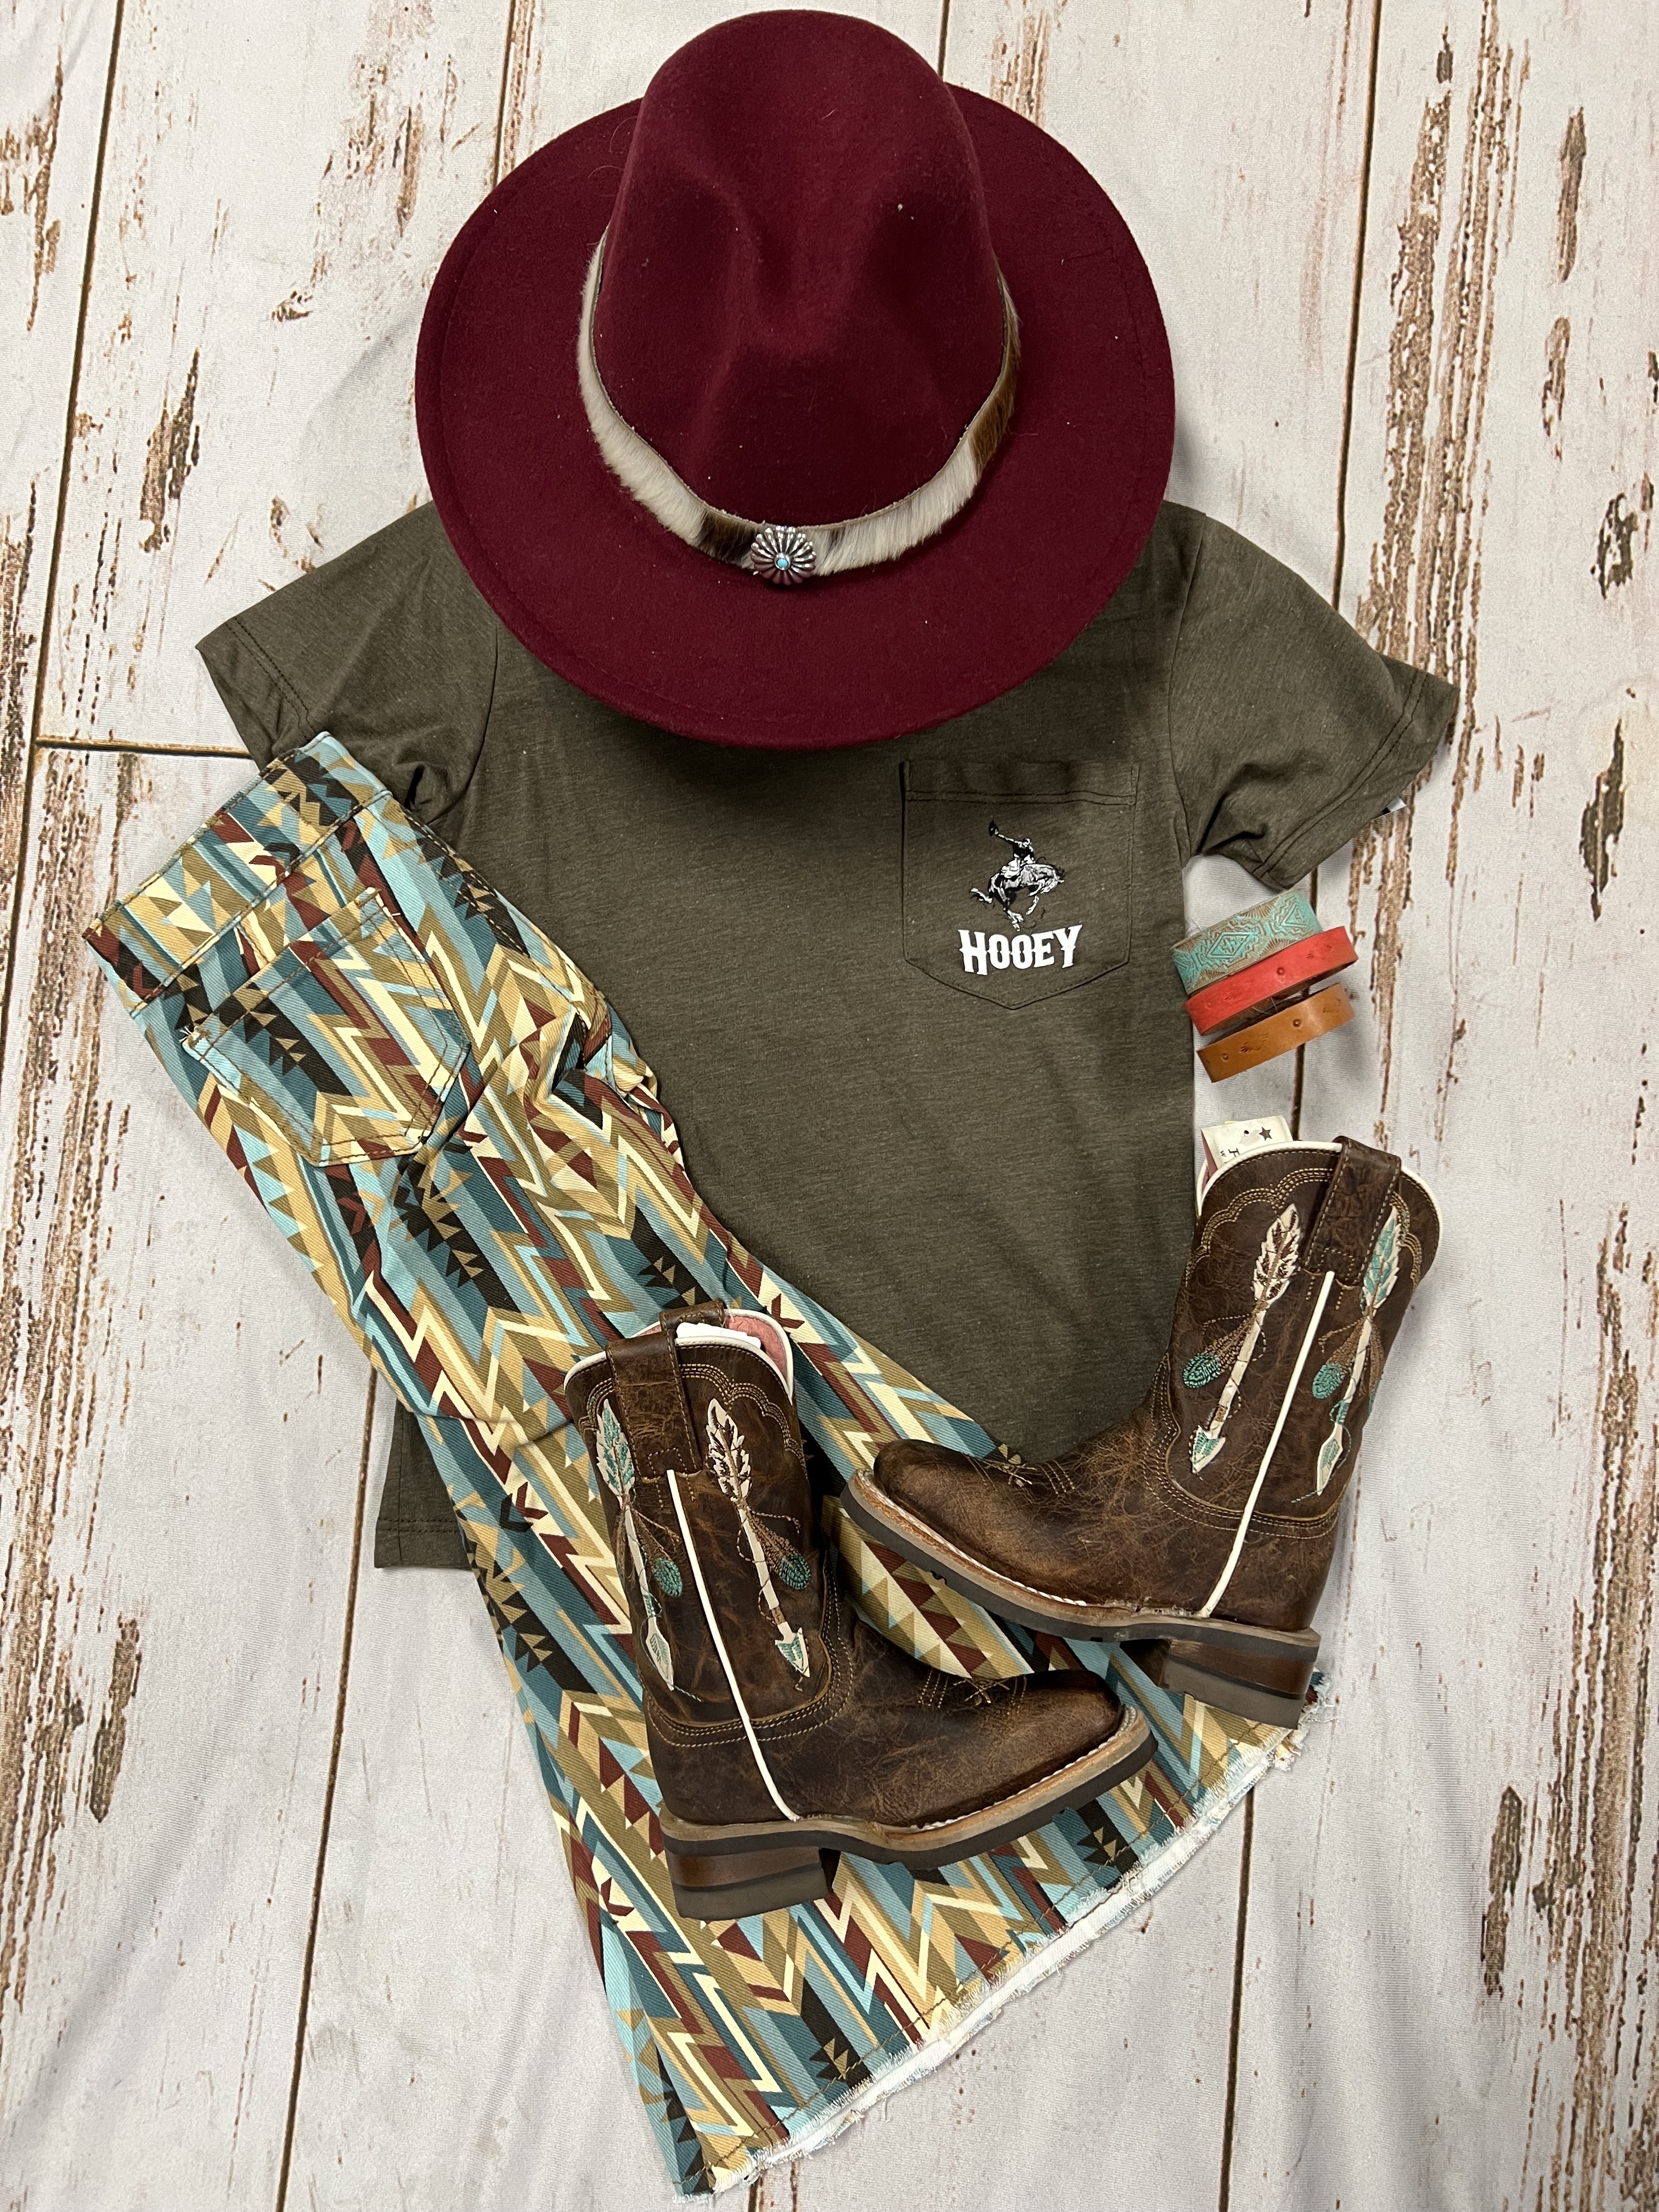 Girl's Mini Lainey Wilson Outfit of the Day - Stockyard Style